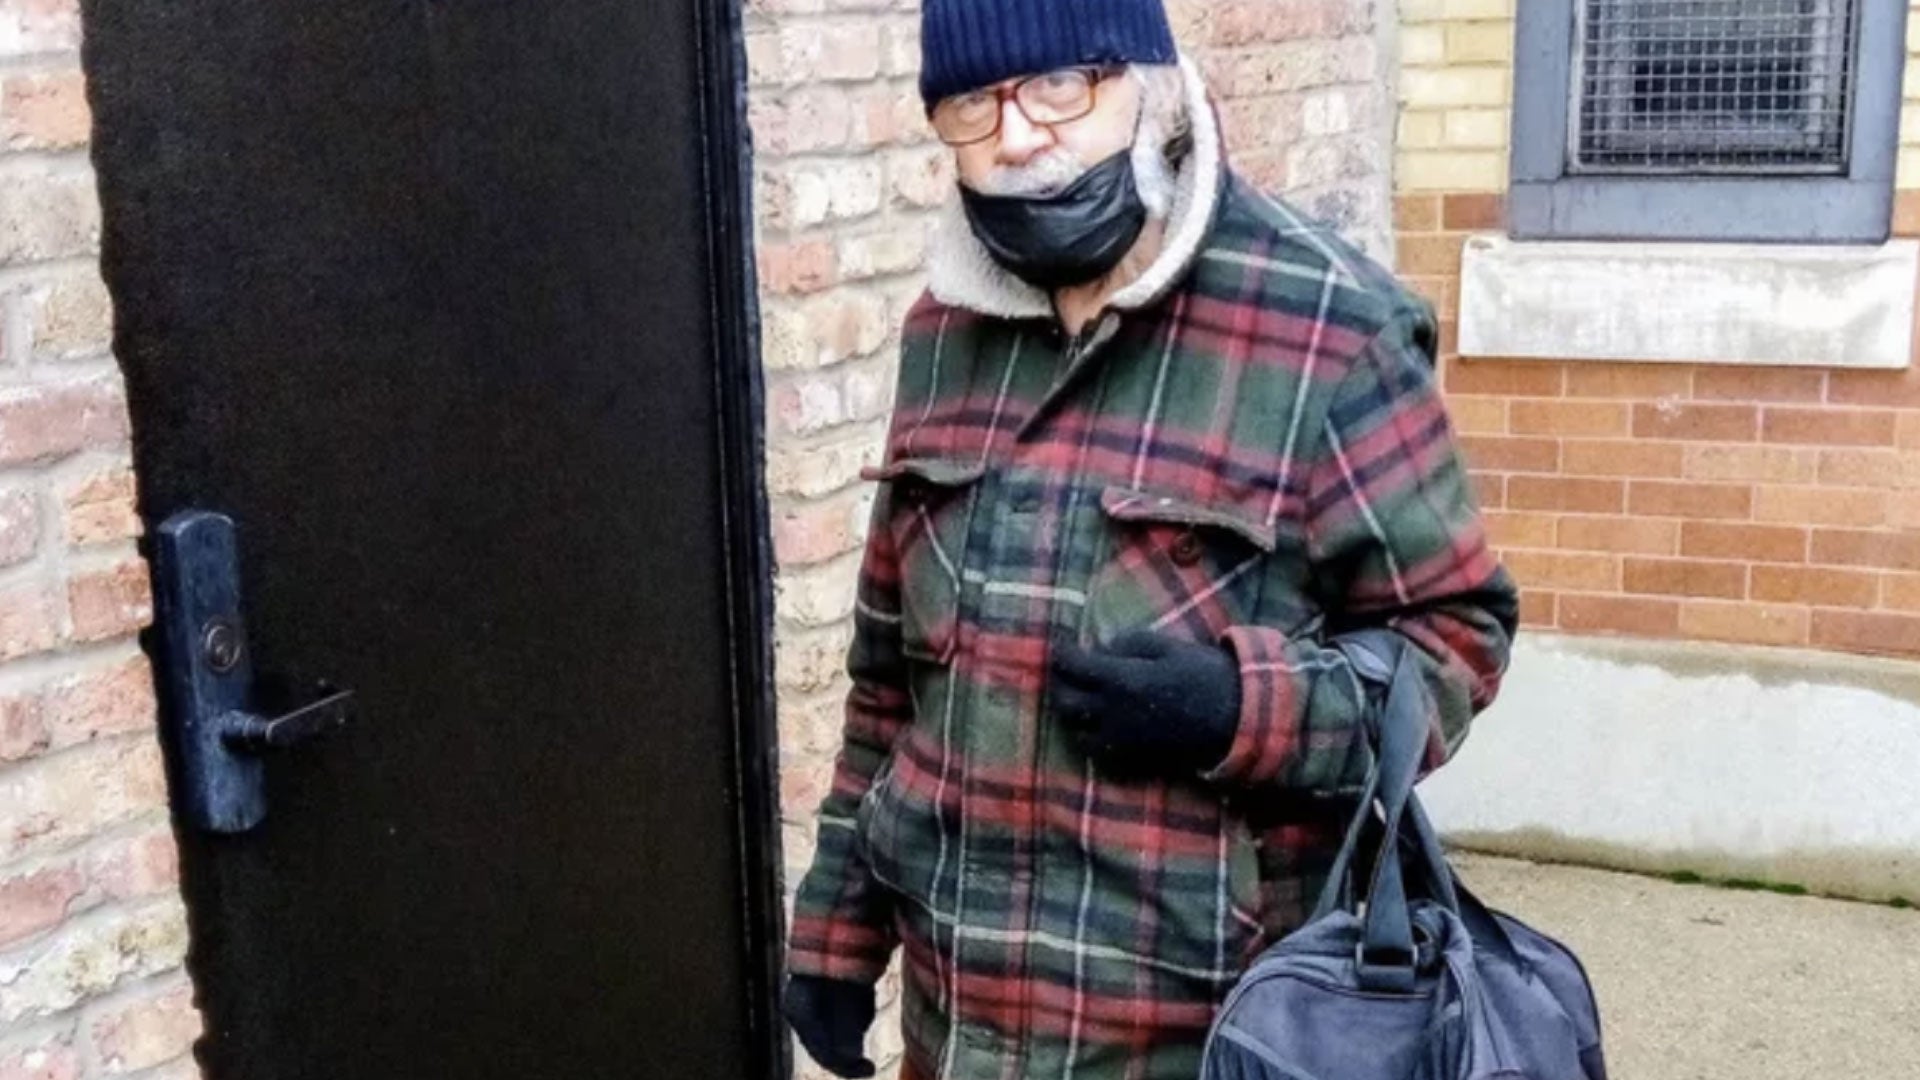 AND NOW SOME GOOD NEWS: Hundreds of Strangers Help Chicago Homeless Man Find a New Home